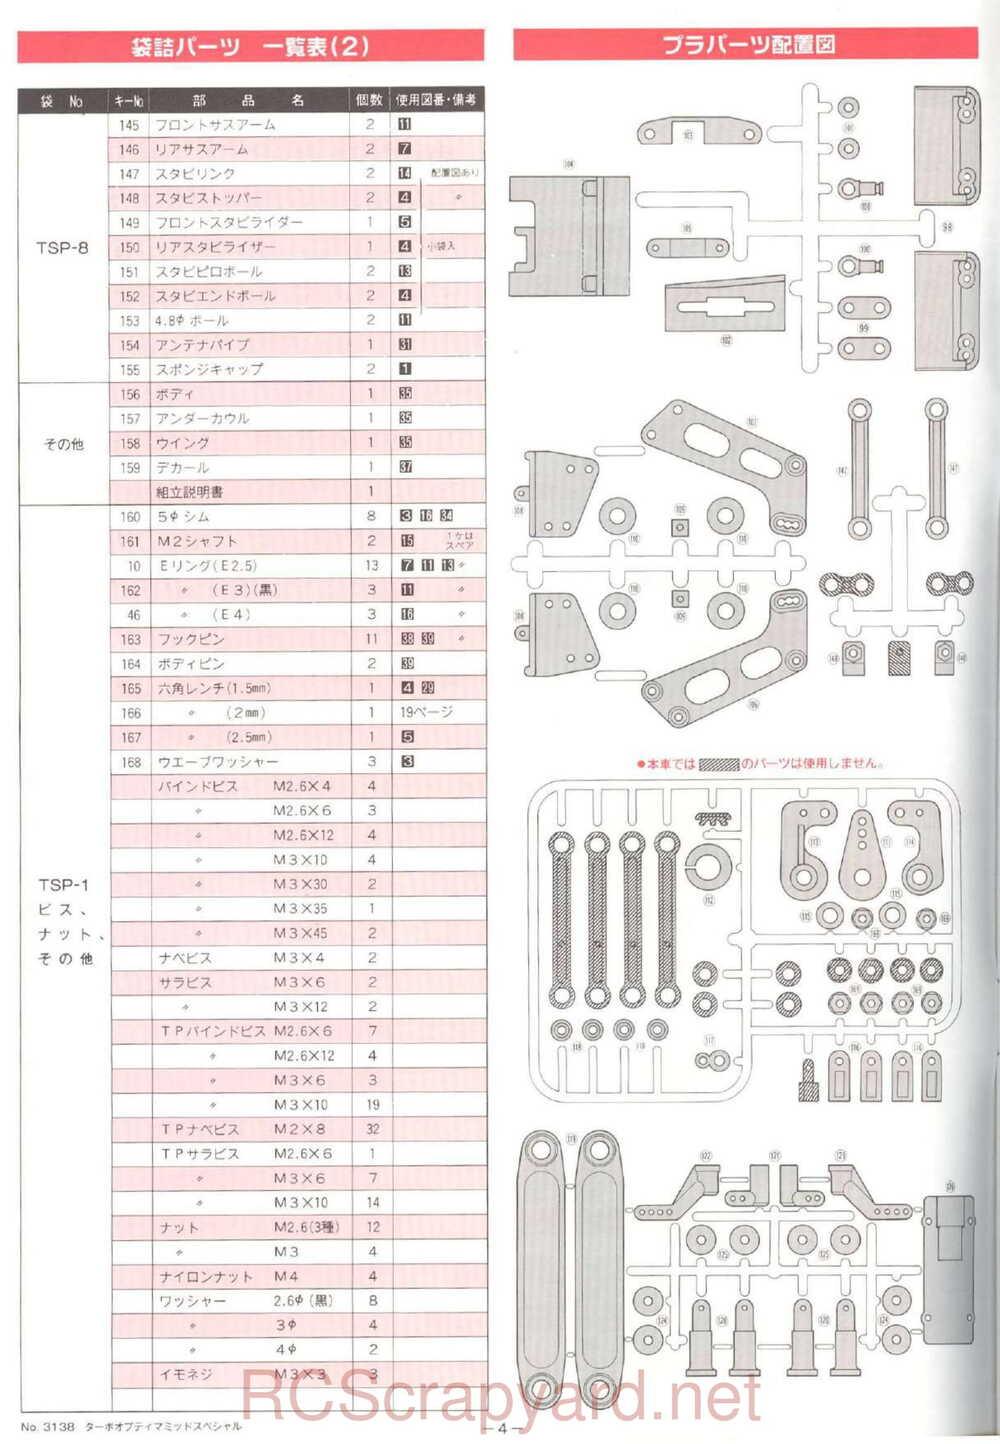 Kyosho - 3138 - Turbo-Optima-Mid-Special - Manual - Page 04